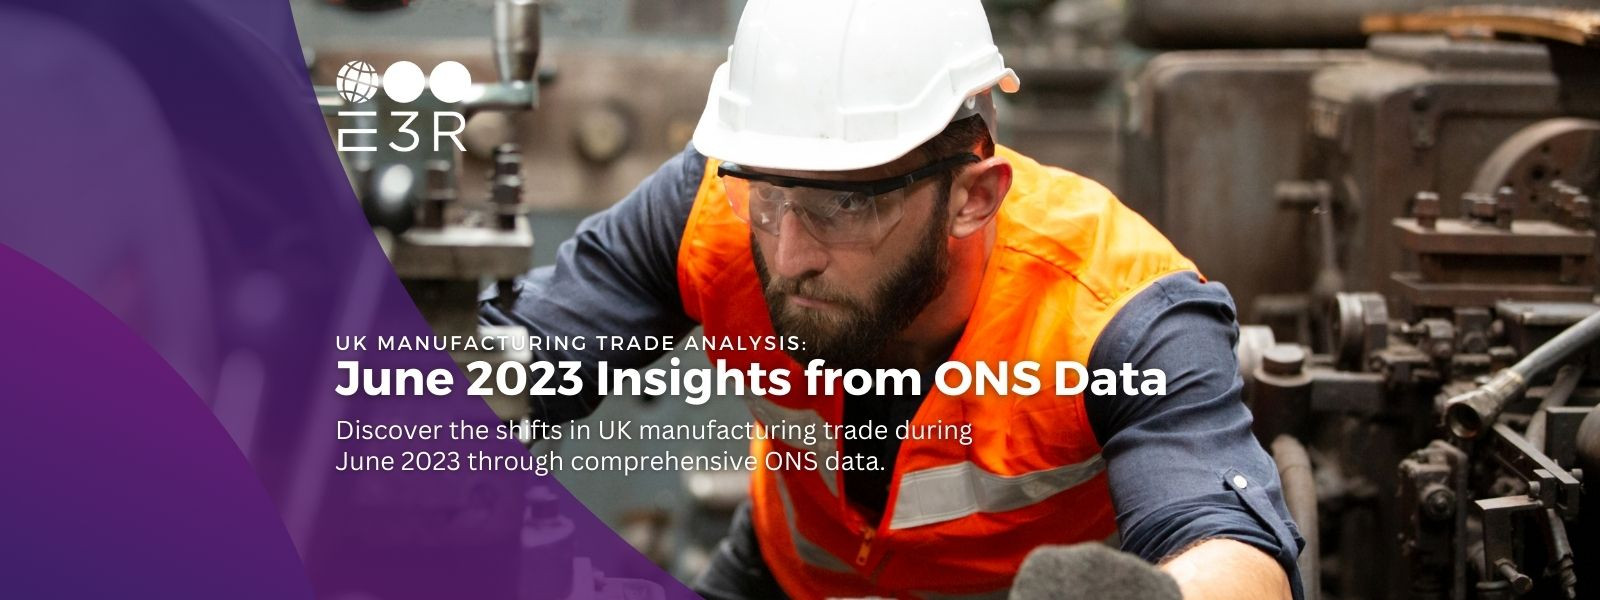 Analysing UK Manufacturing Trade Performance in June 2023: Insights from ONS Data